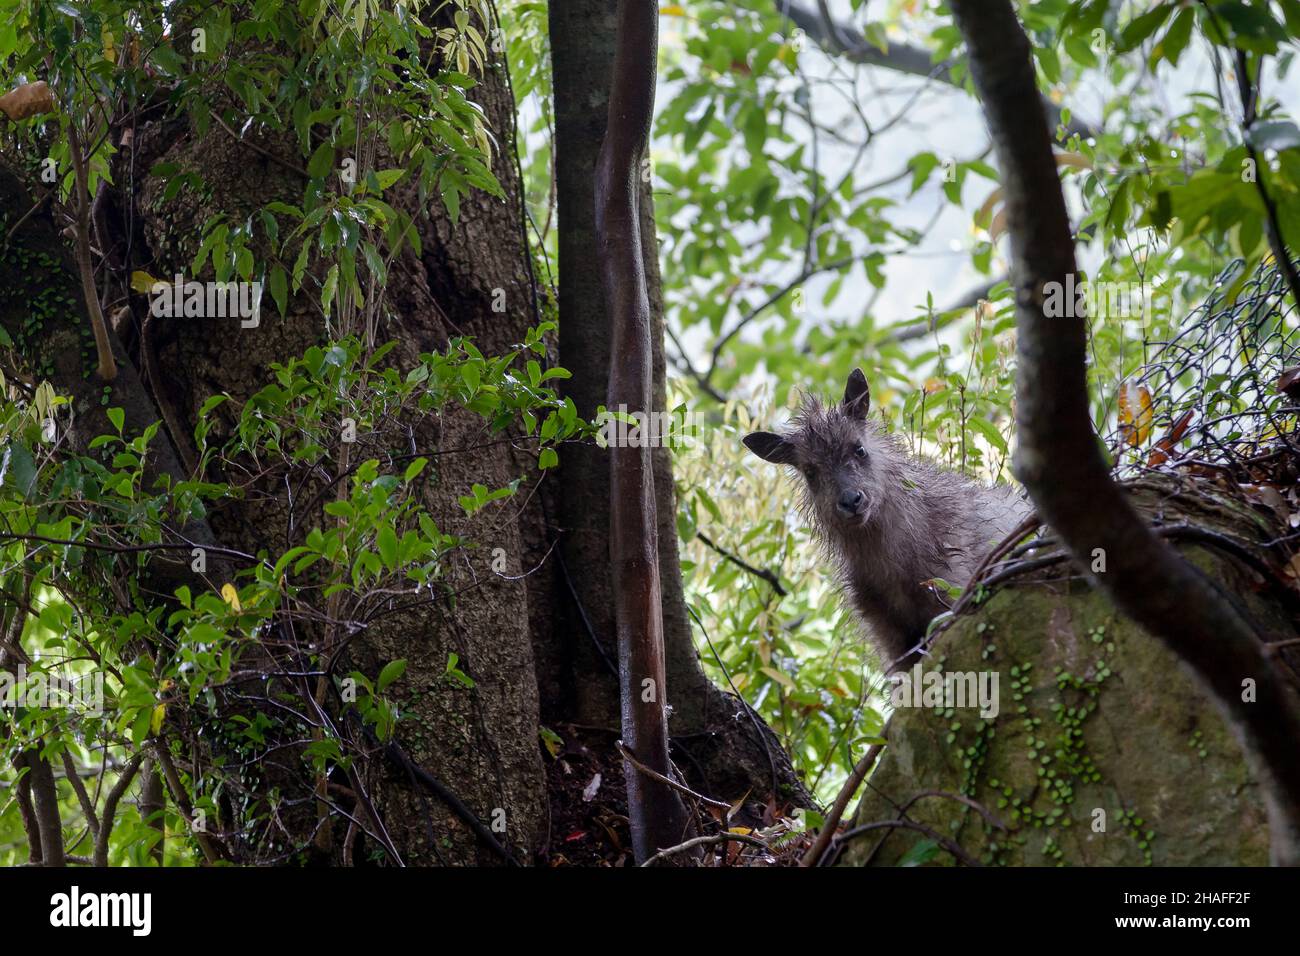 A young Japanese Serow (Capricornis crispus) also known as a coarse pelt deer, in the forest on Mount Oyama, Kanagawa, Japan. Stock Photo